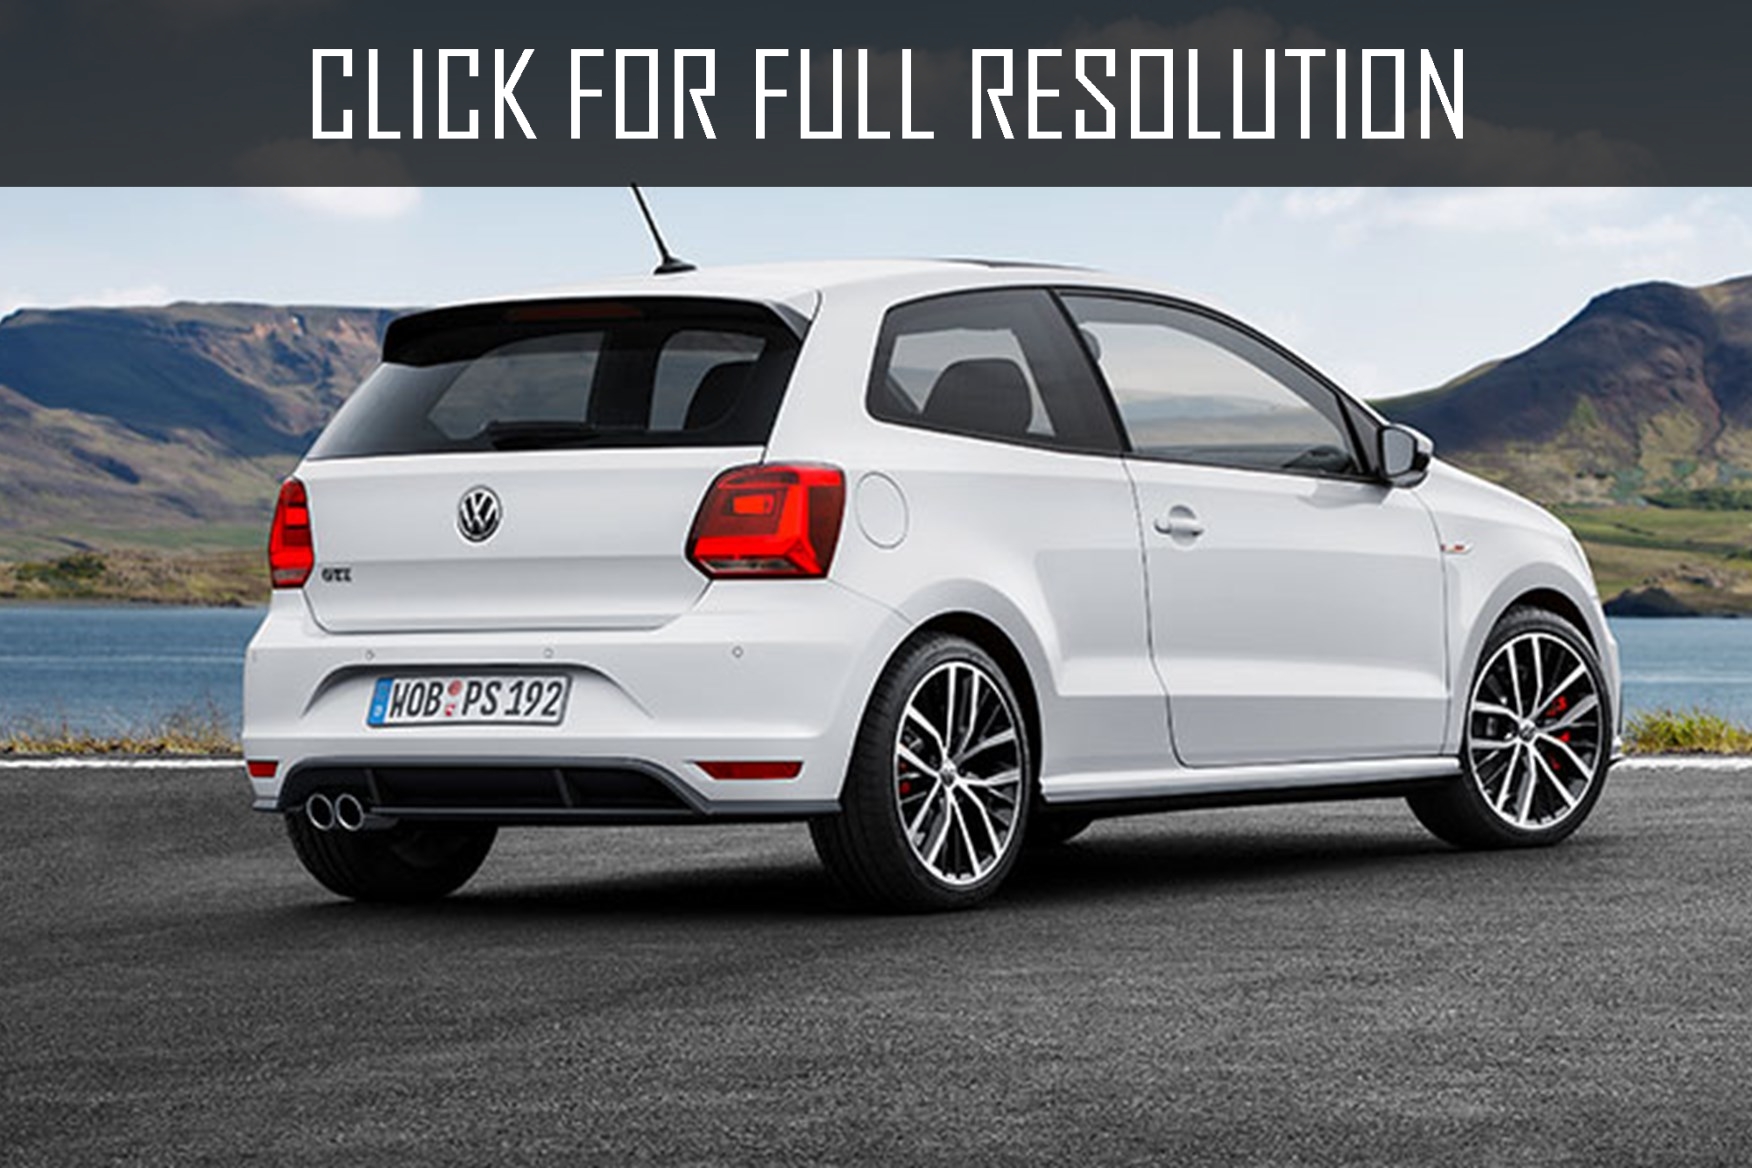 Volkswagen Golf Polo amazing photo gallery, some information and